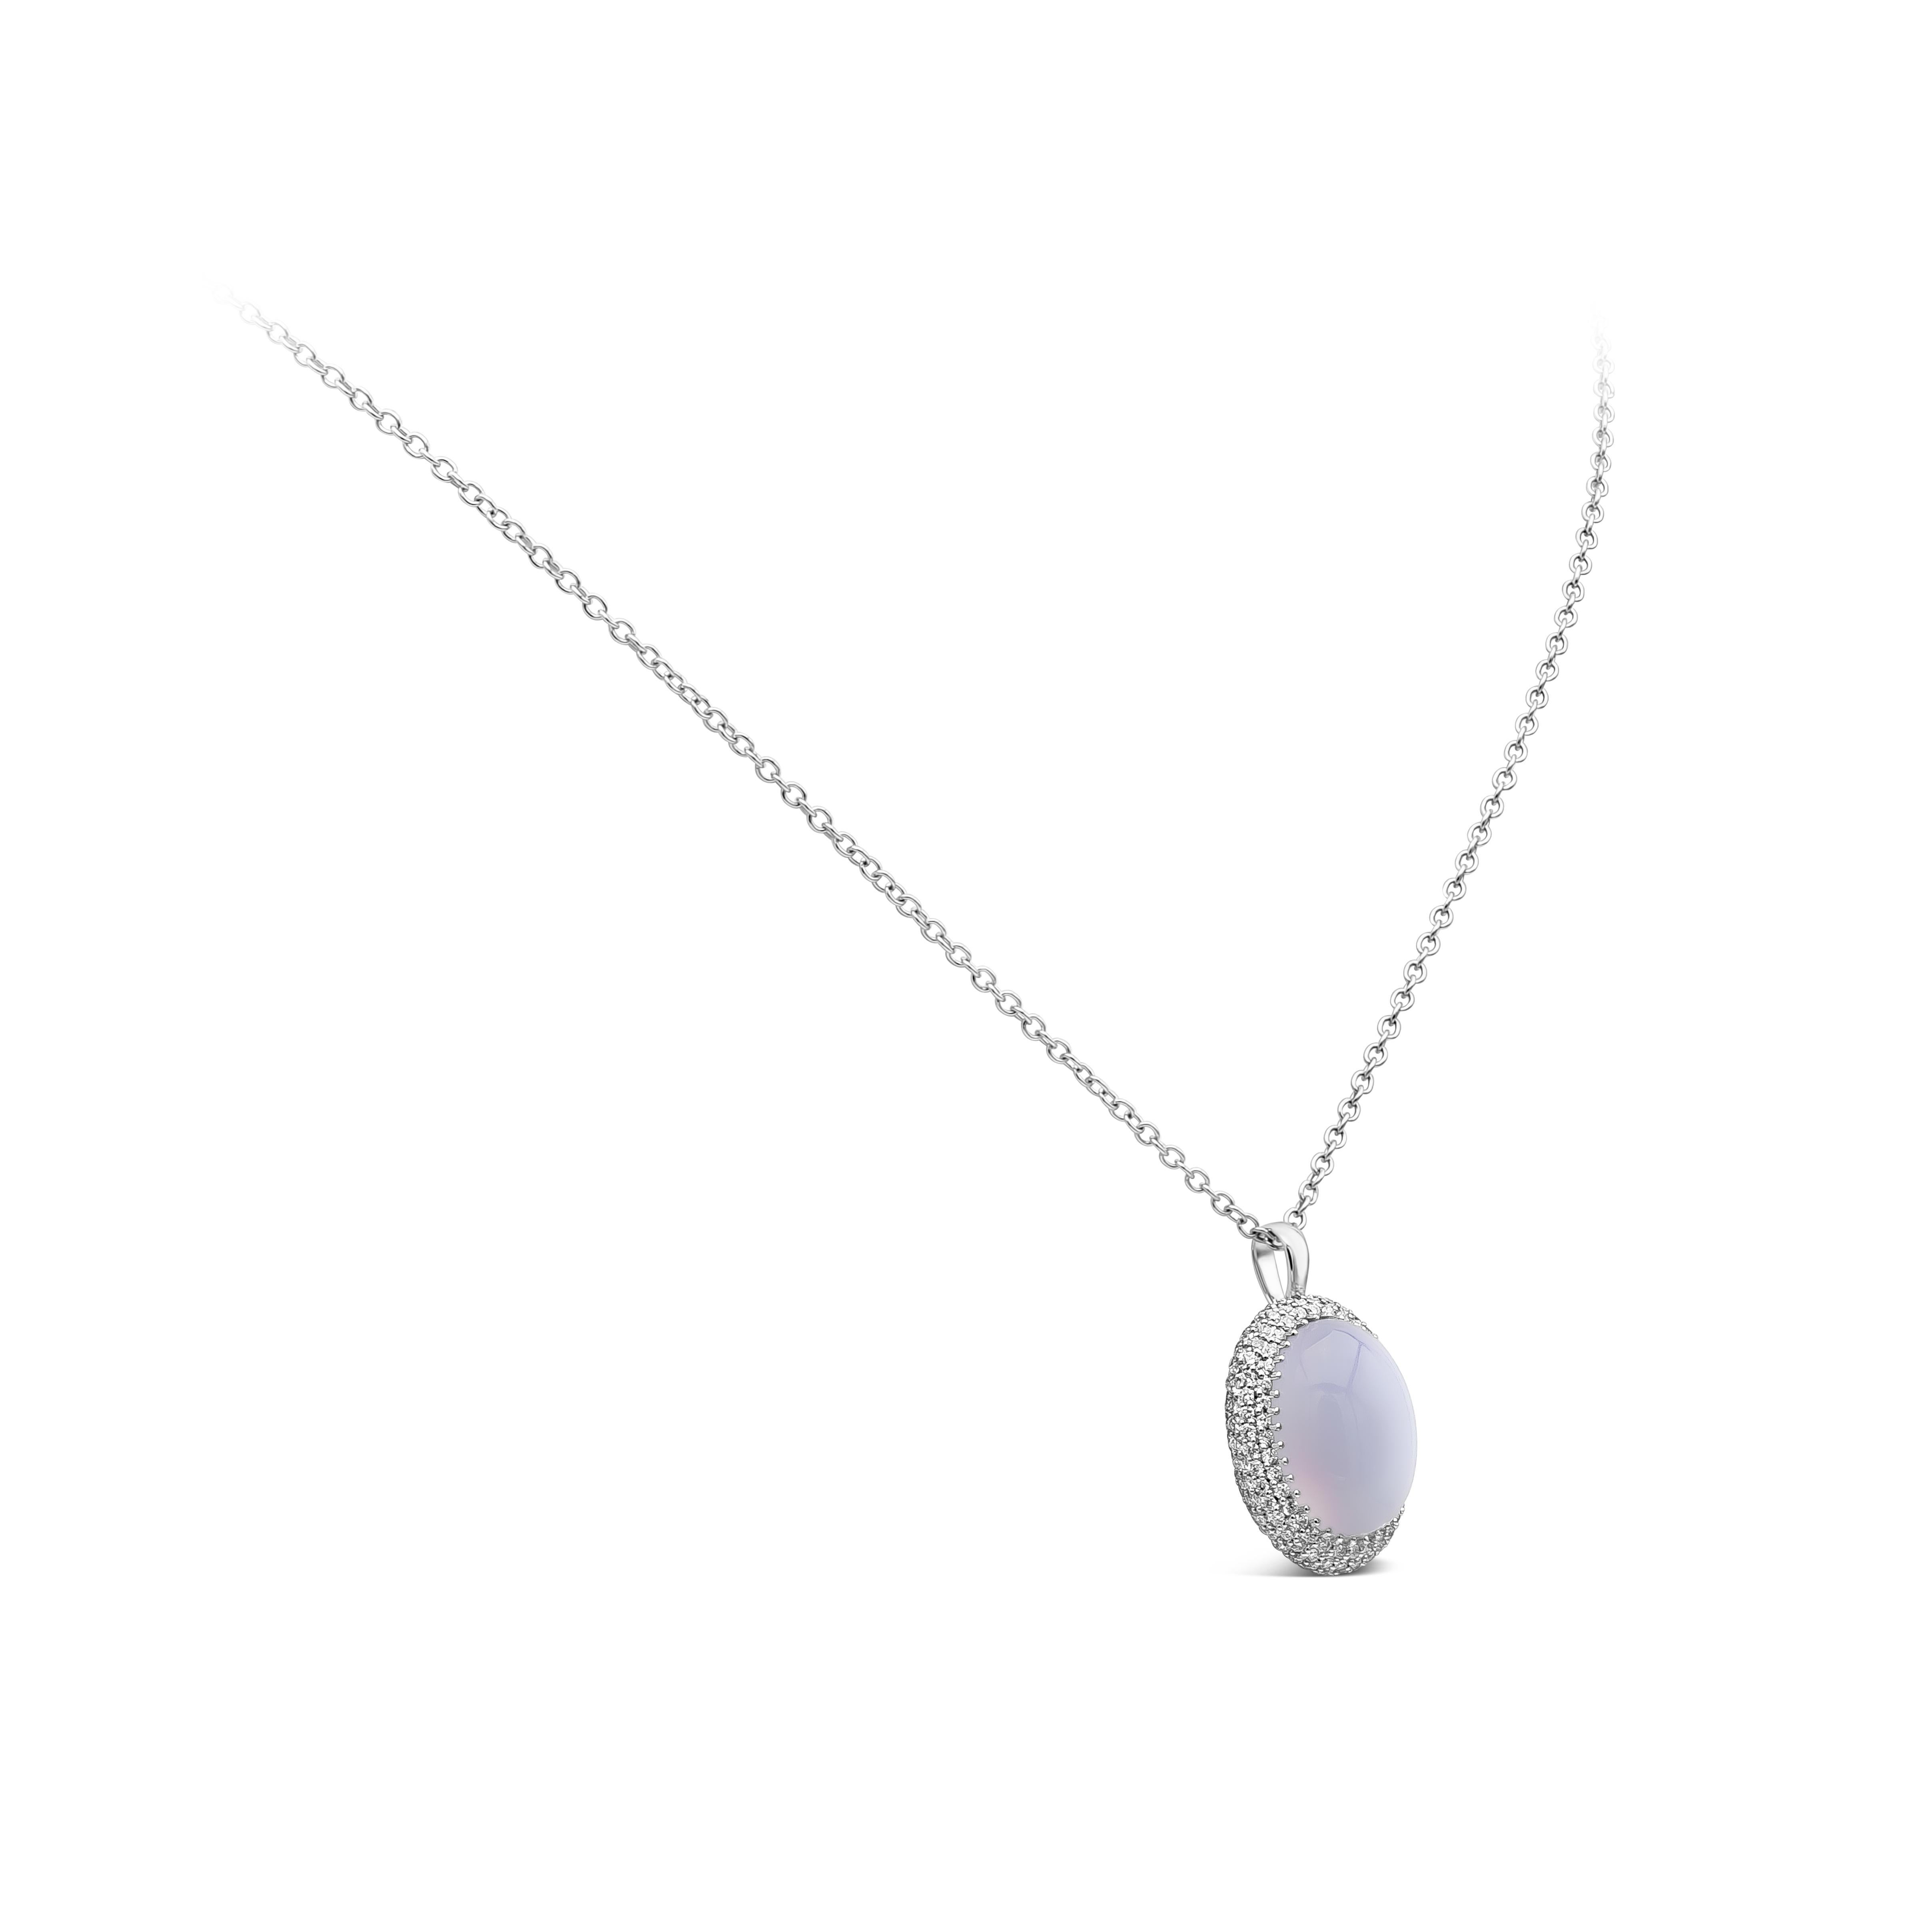 Contemporary 7 Carat Oval Cut Lavender Chalcedony Pendant Necklace in White Gold For Sale